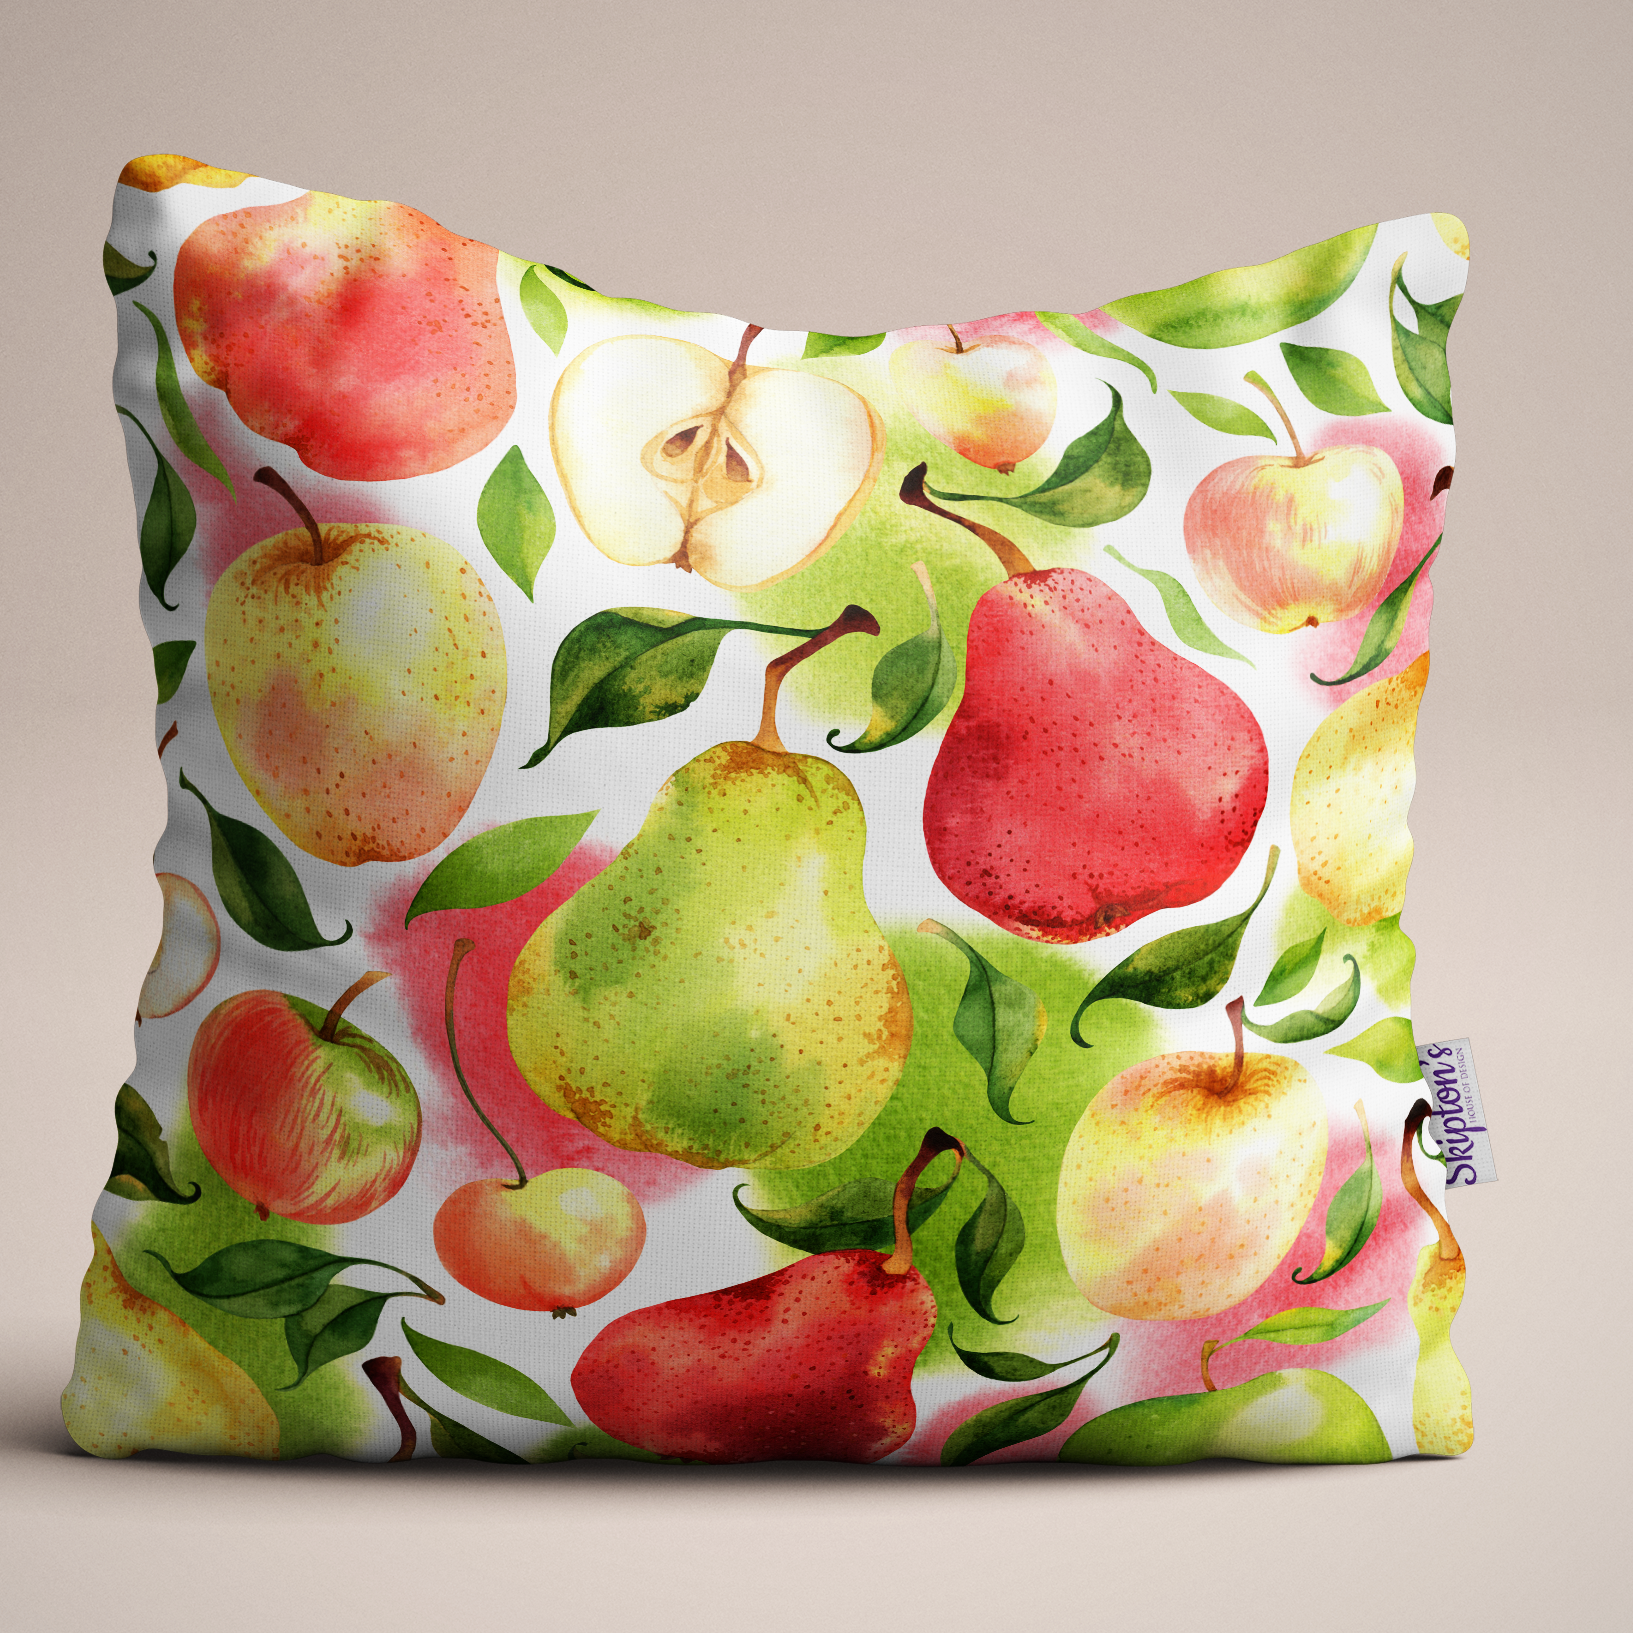 Apple and Pears design luxury linen cushion